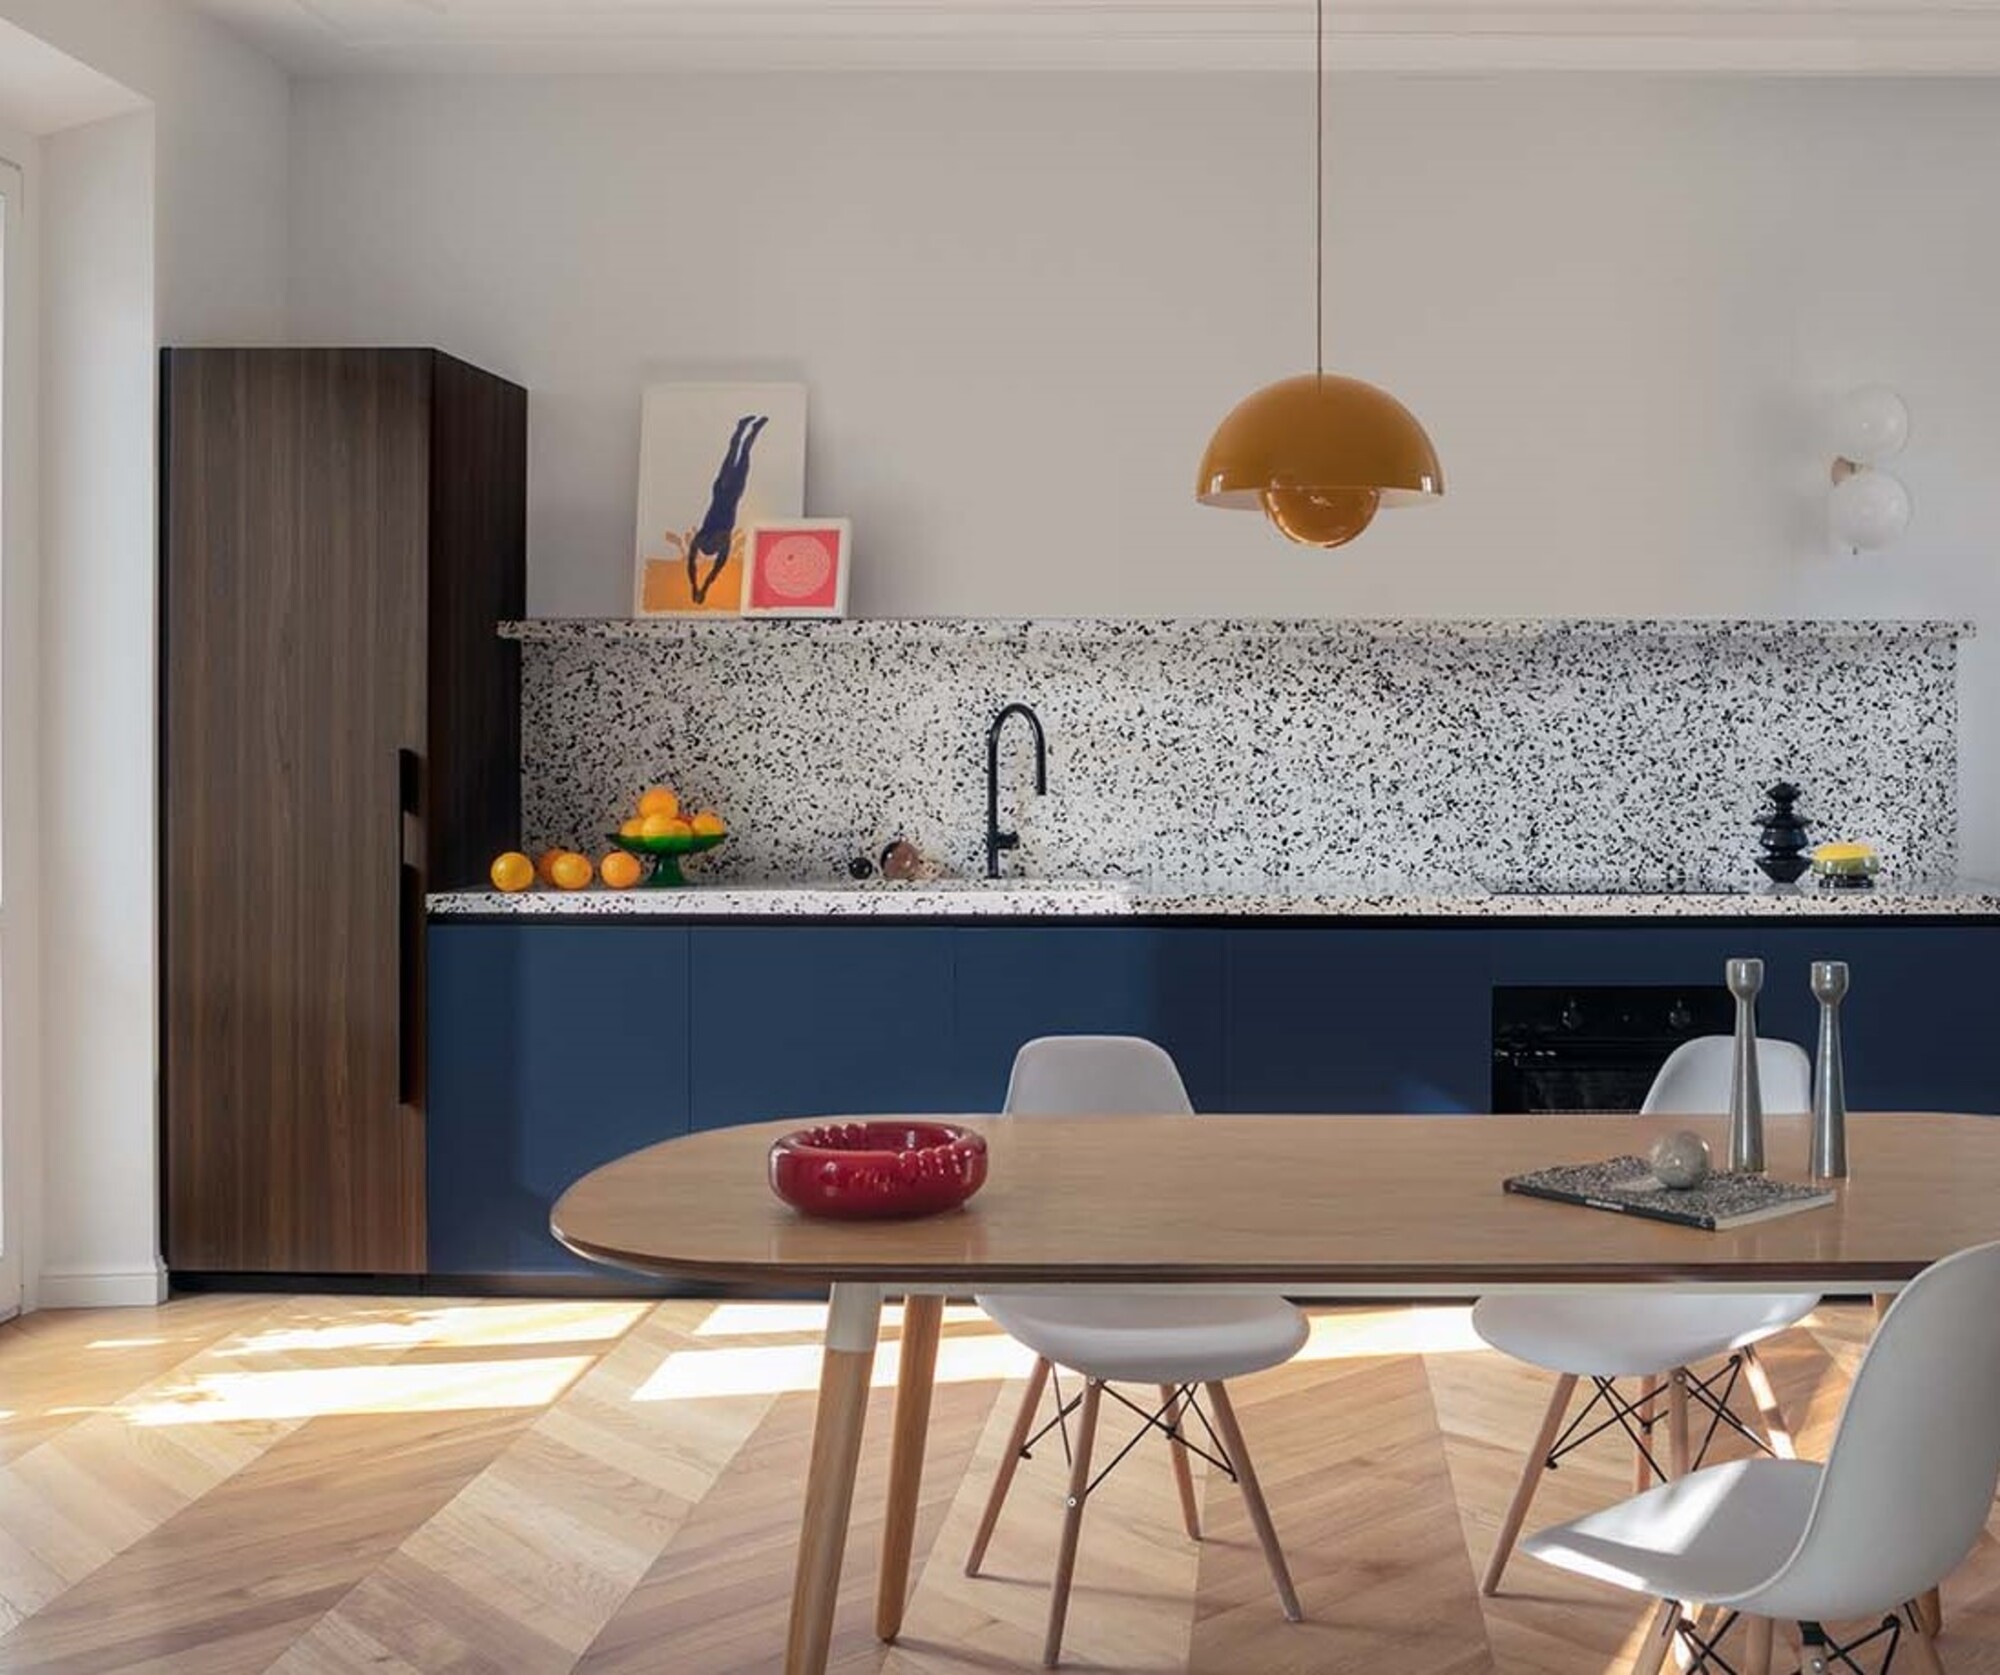 A kitchen with hanging pendant light and terrazzo backsplash